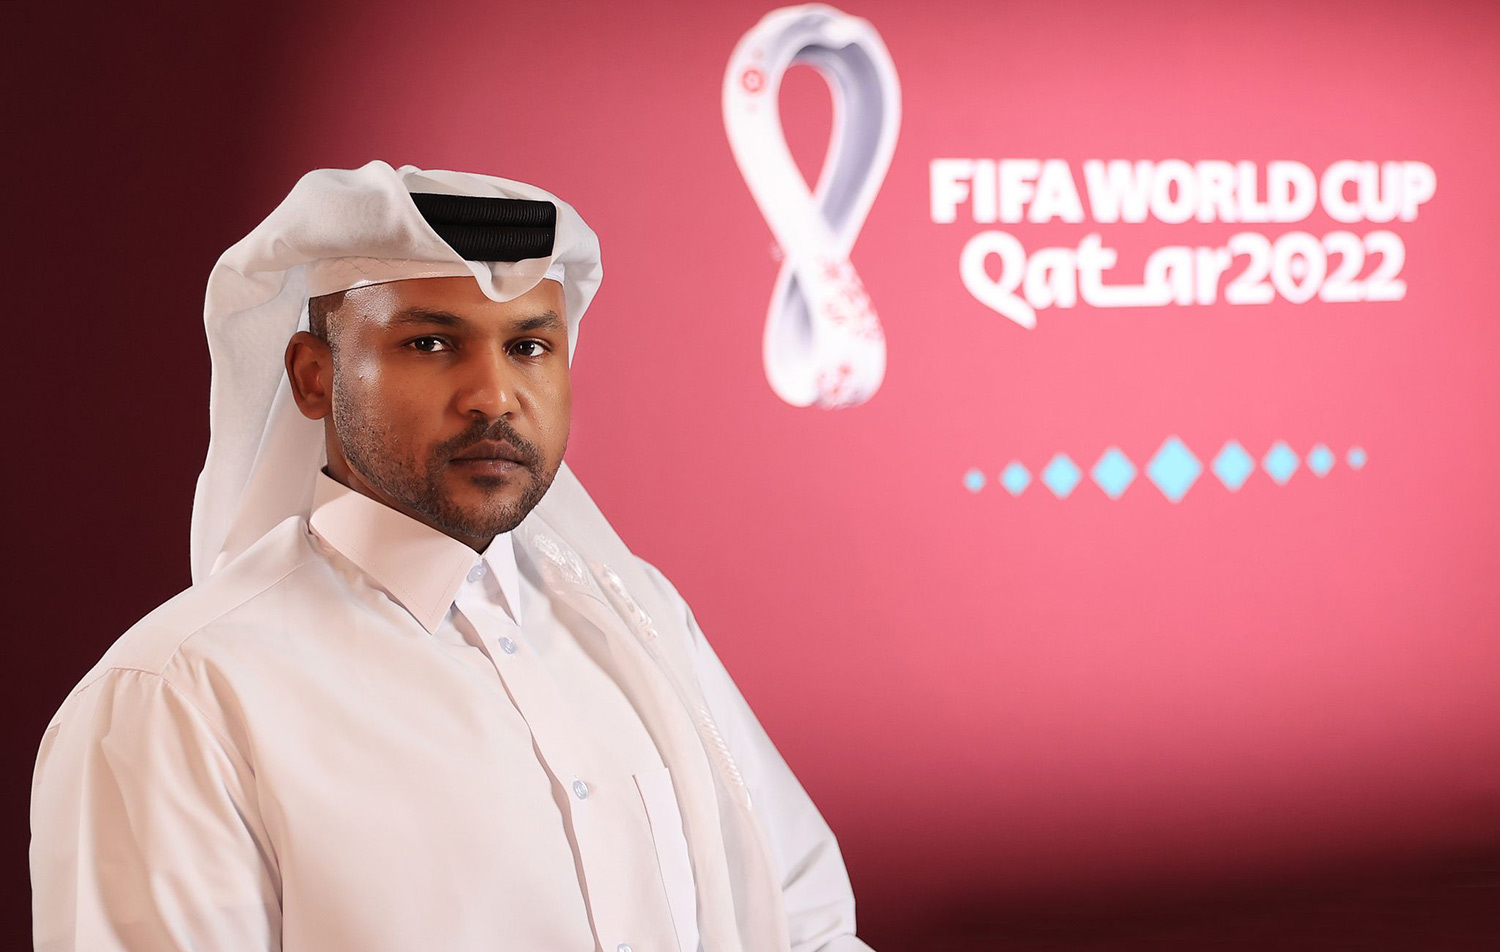 Qatar invites performers from across the globe to showcase their talents during FIFA World Cup™